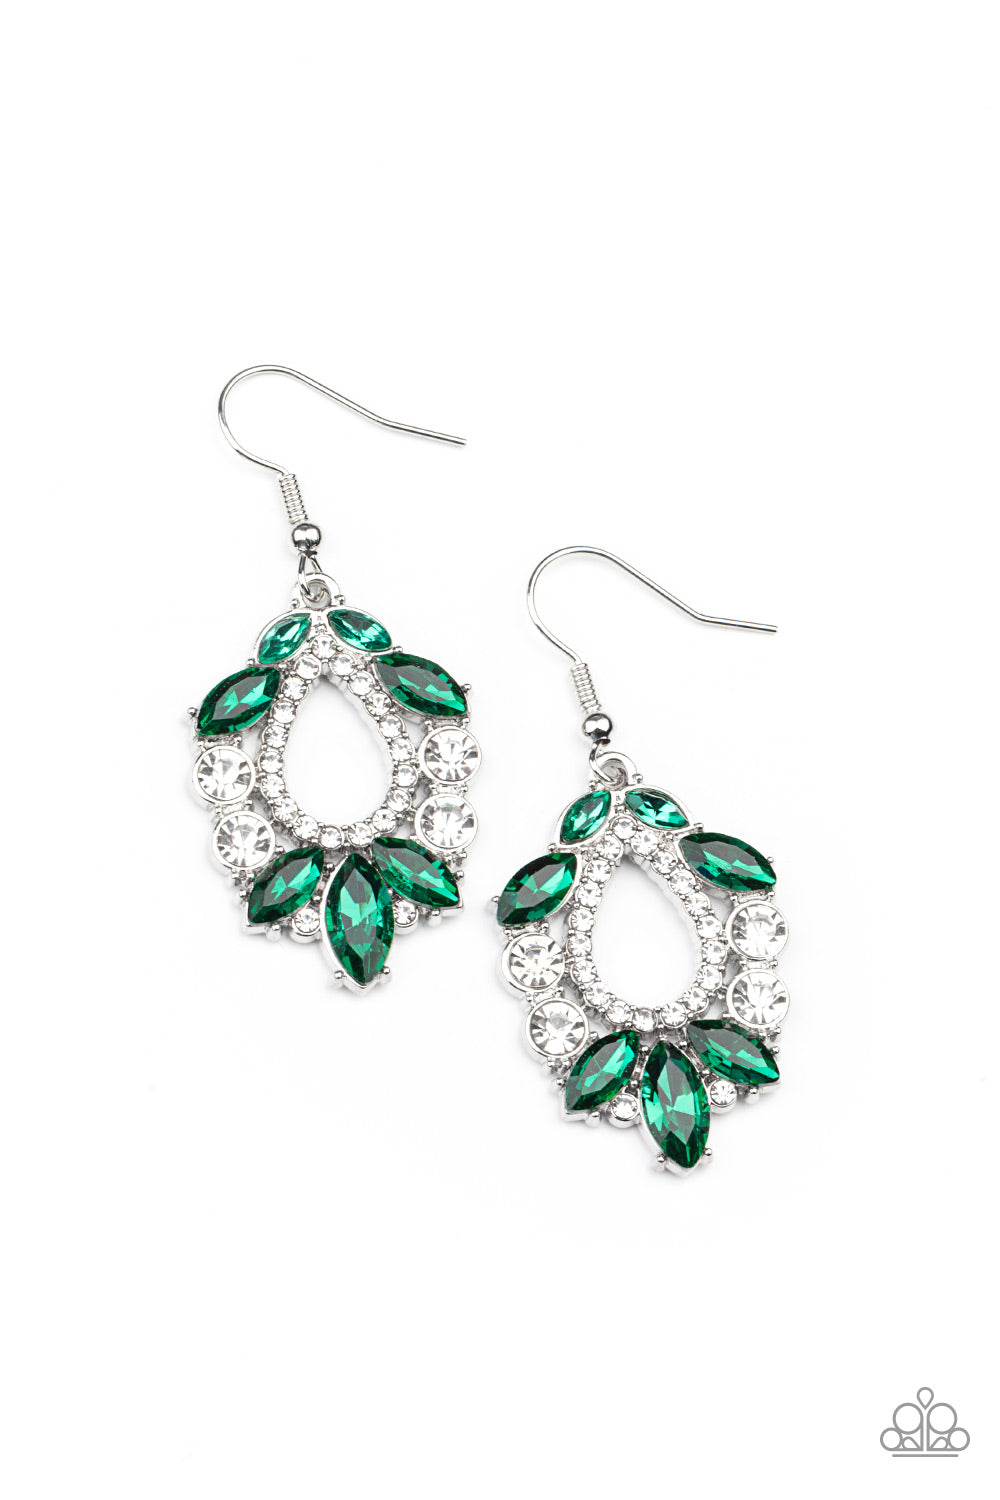 New Age Noble Green Earring - Paparazzi Accessories  Featuring regal marquise and classic round cuts, a glittery collection of white and green rhinestones coalesce into a jaw-dropping teardrop frame. Earring attaches to a standard fishhook fitting.  All Paparazzi Accessories are lead free and nickel free!  Sold as one pair of earrings.